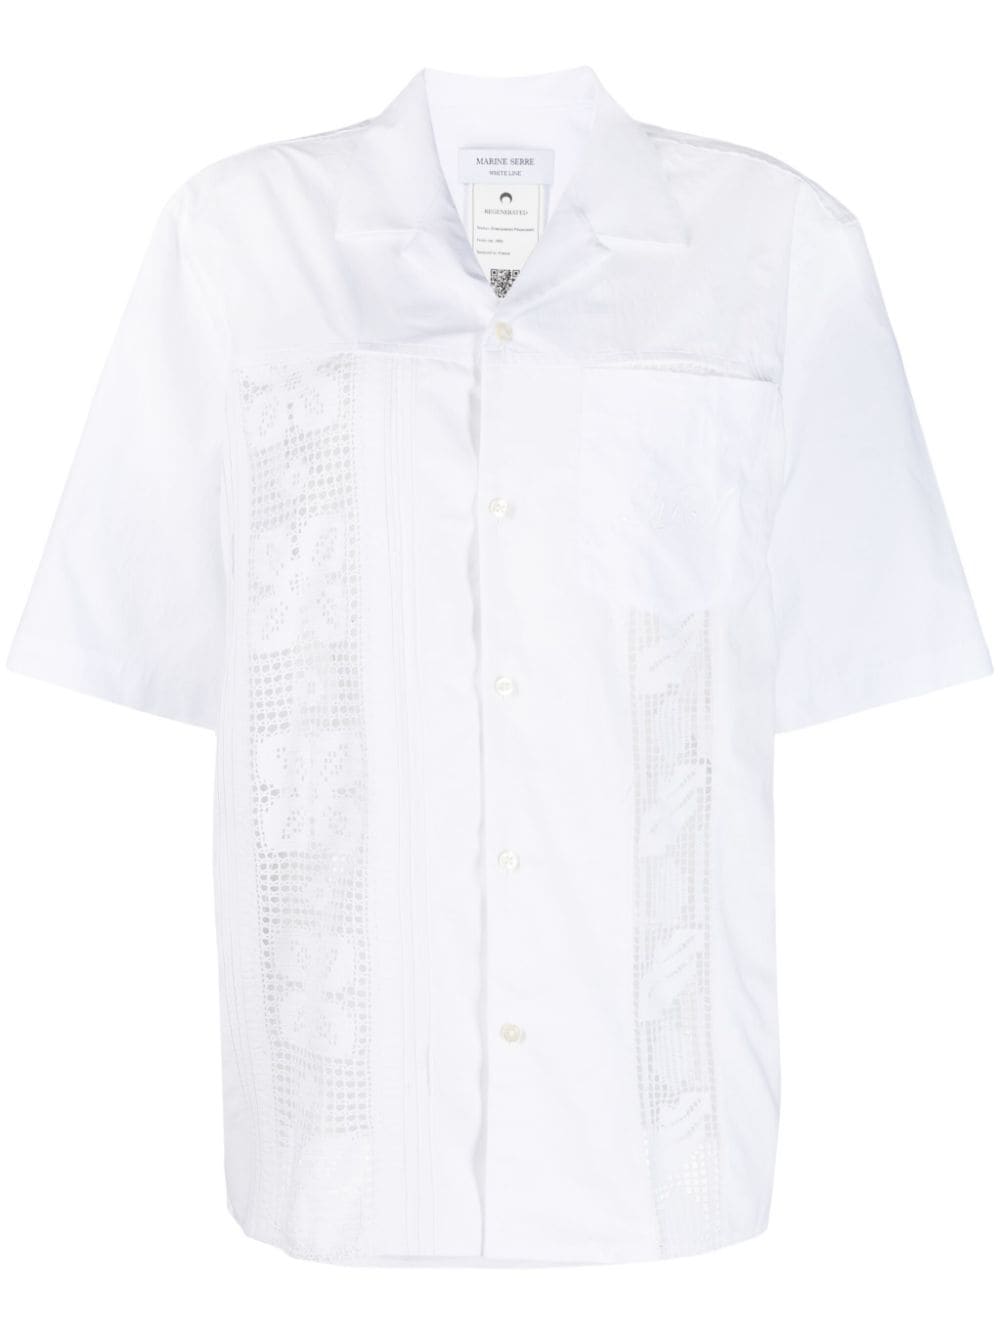 Marine Serre Household lace-trimmed shirt - White